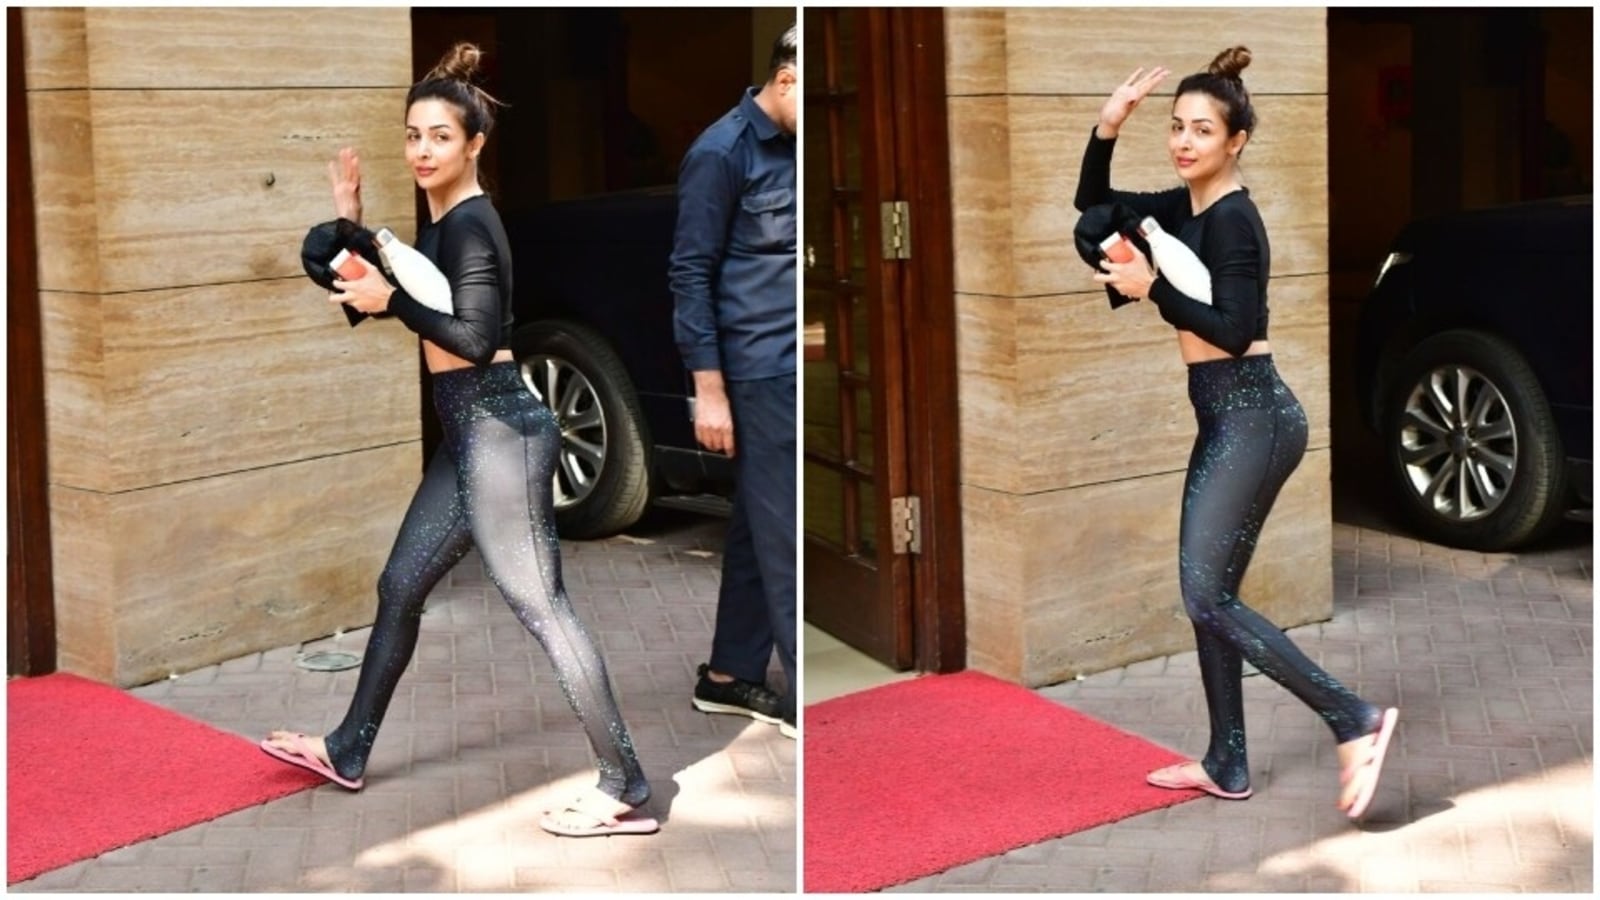 Malaika Arora’s Wednesday athleisure is all about style and sass